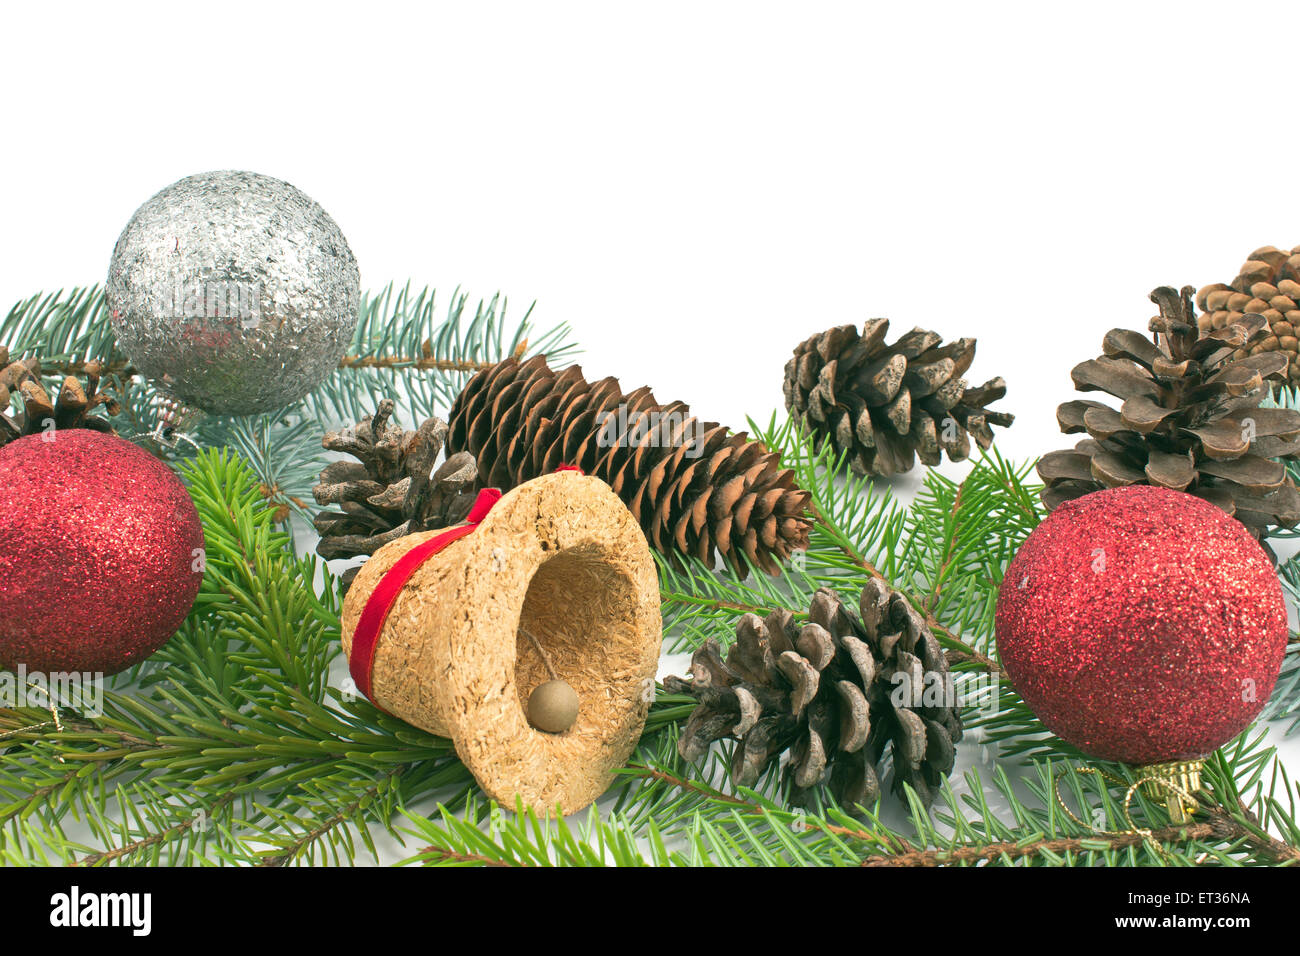 Pine cones, needles and Christmas balls  on white background Stock Photo